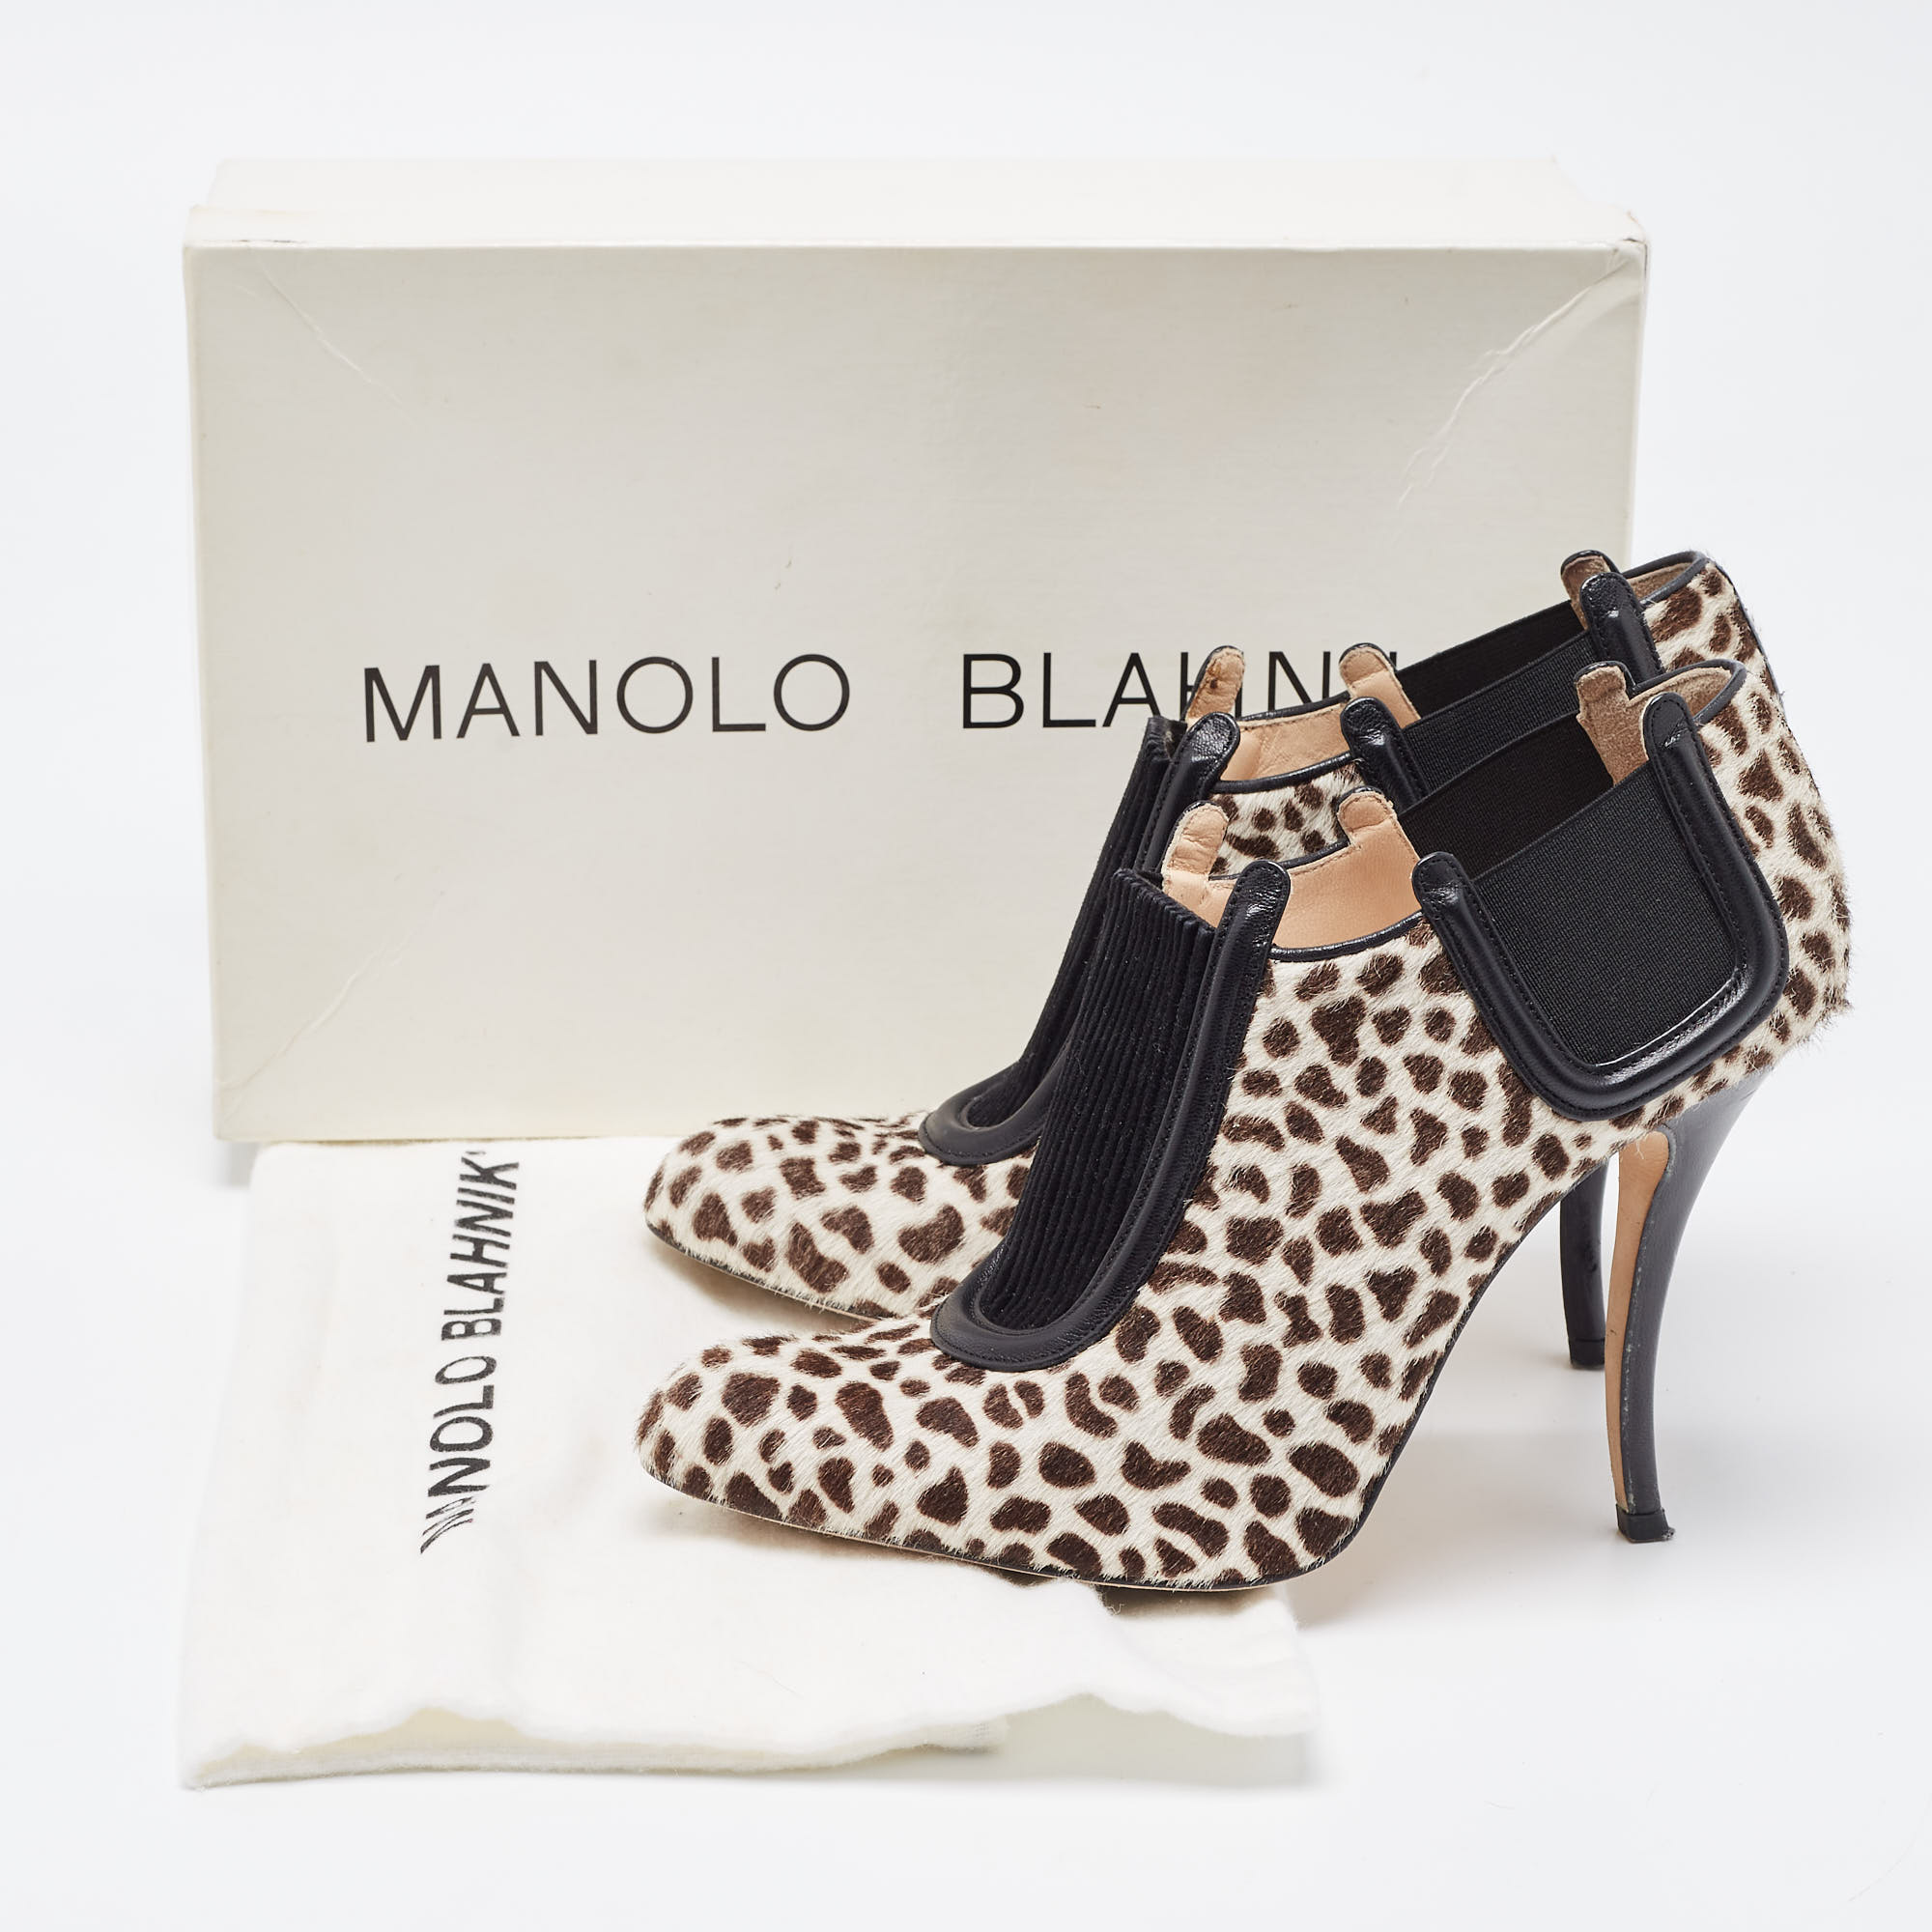 Manolo Blahnik Tricolor Animal Print Calf Hair And Leather Ankle Booties Size 37.5